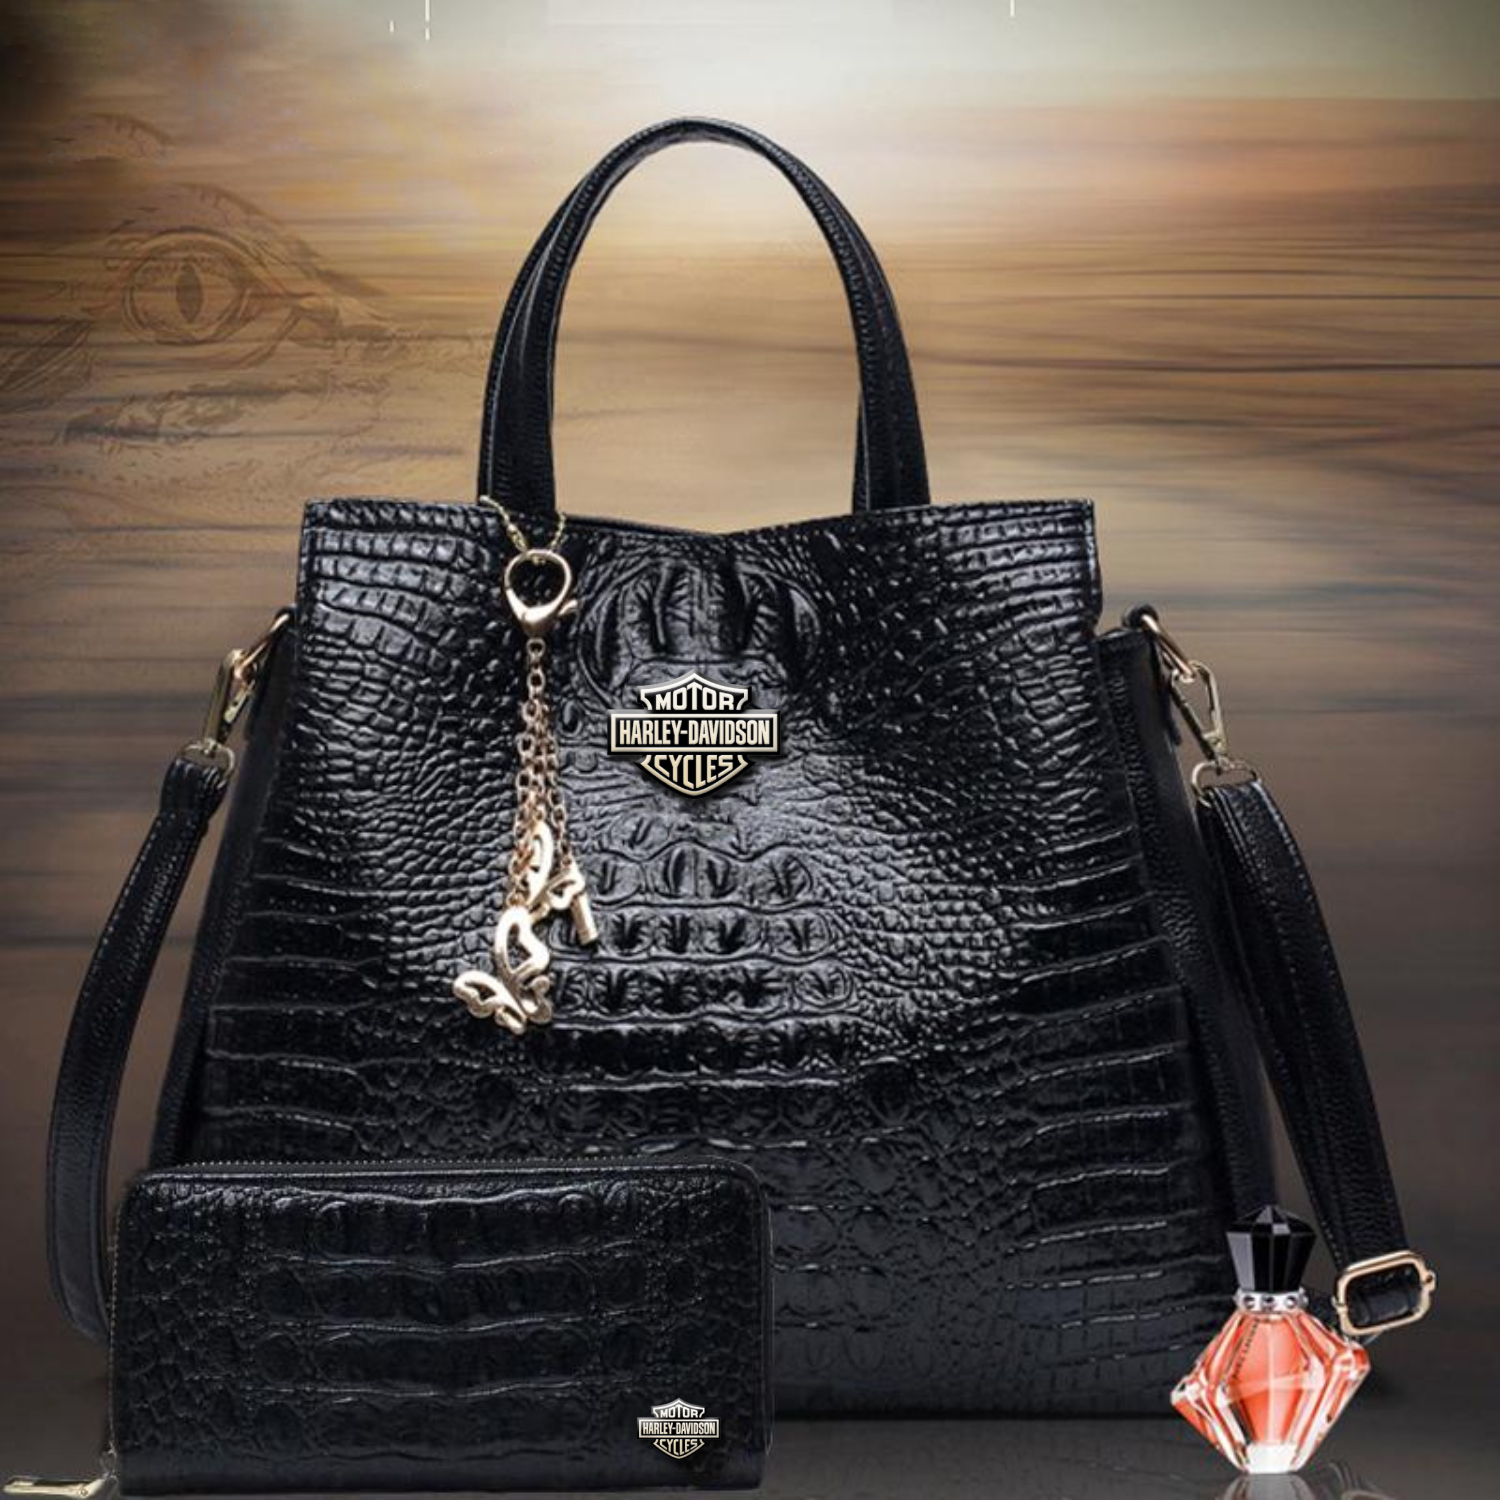 New H-D purses just in! - Down Home Harley-Davidson